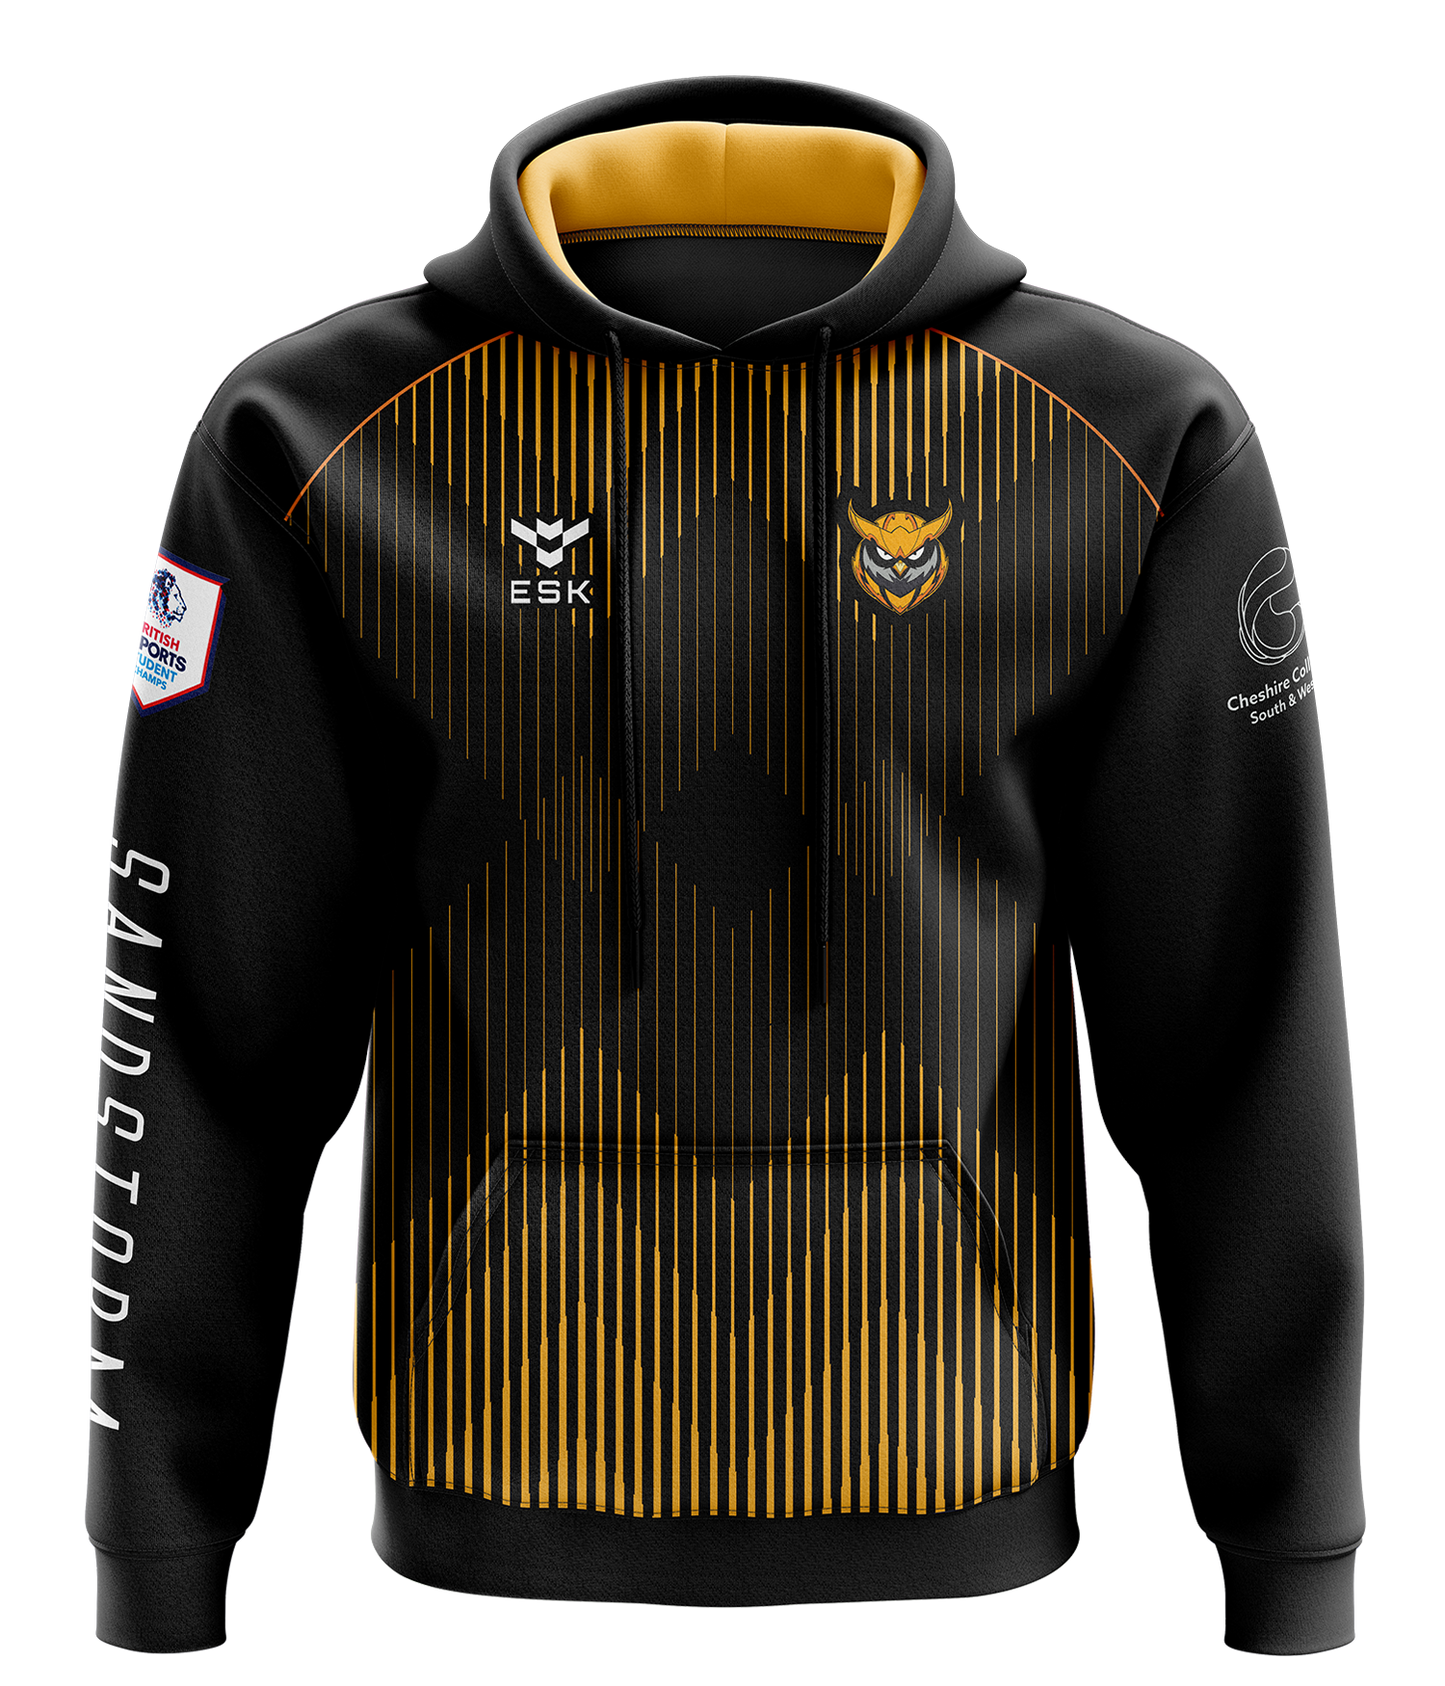 Cheshire Sandstorm Esports Hoodie - with Gamertag